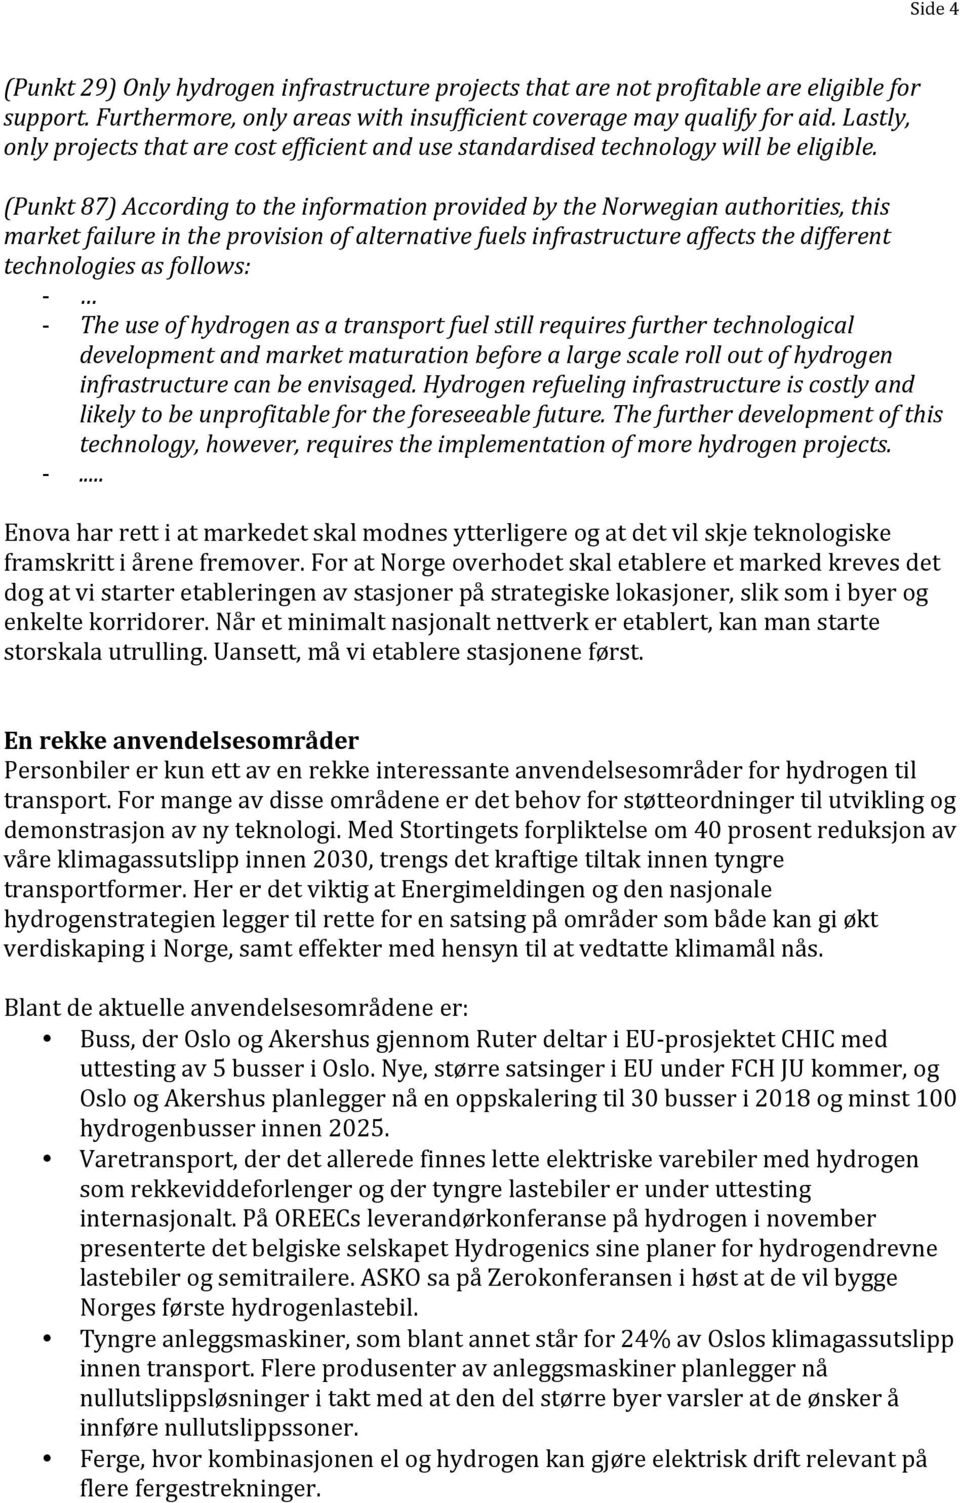 (Punkt 87) According to the information provided by the Norwegian authorities, this market failure in the provision of alternative fuels infrastructure affects the different technologies as follows: